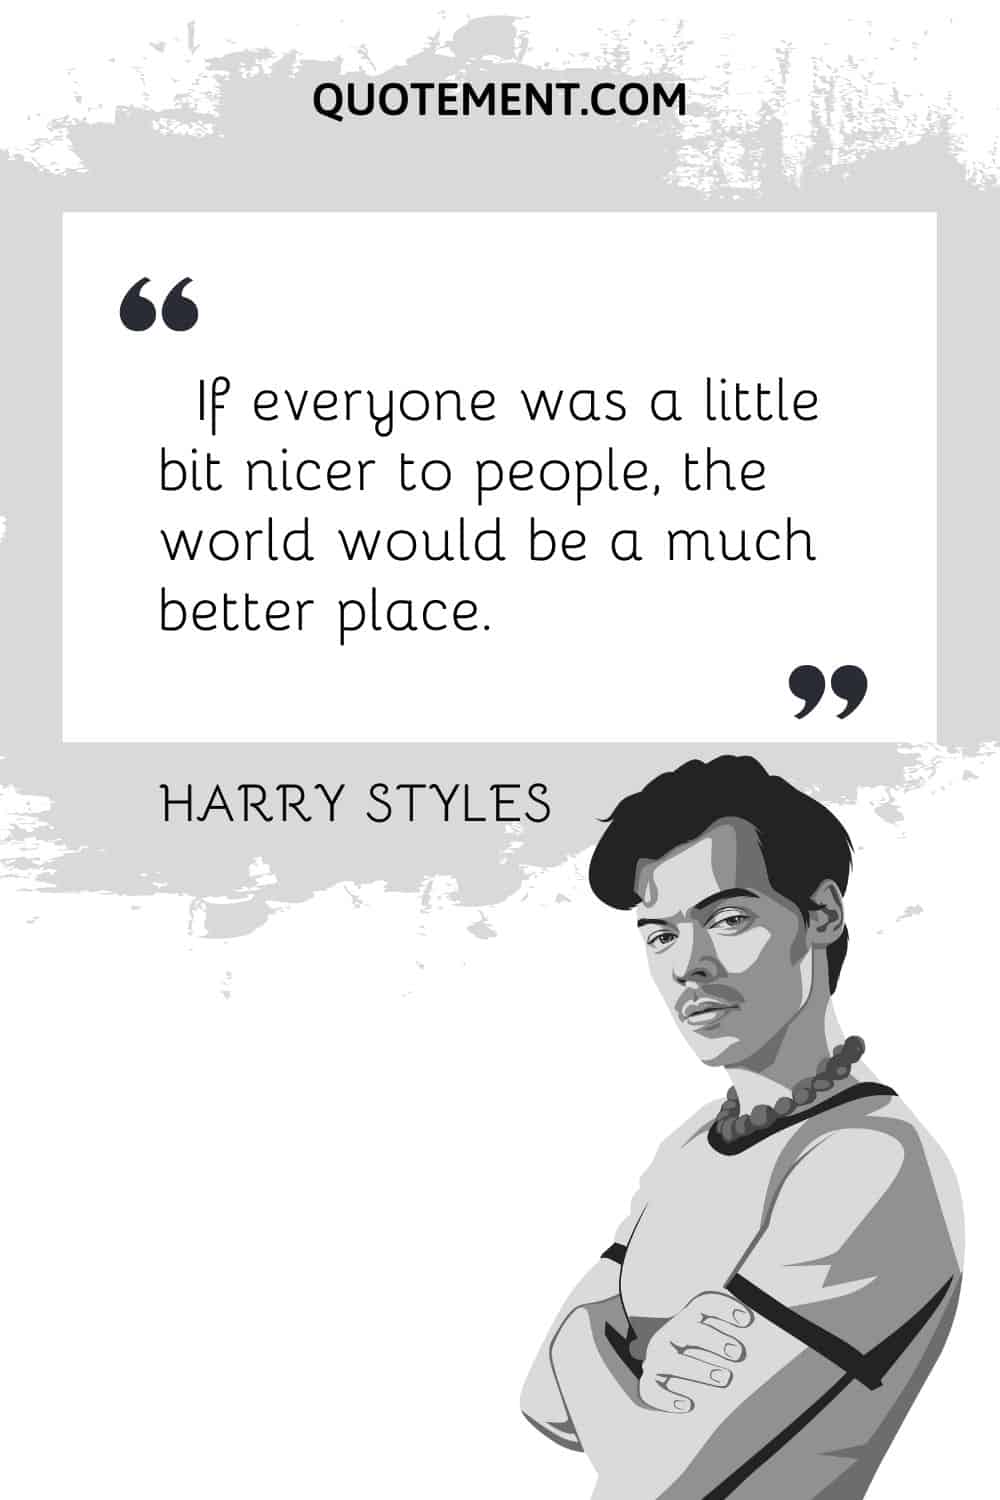 harry style's black and white image representing the greatest harry style quote